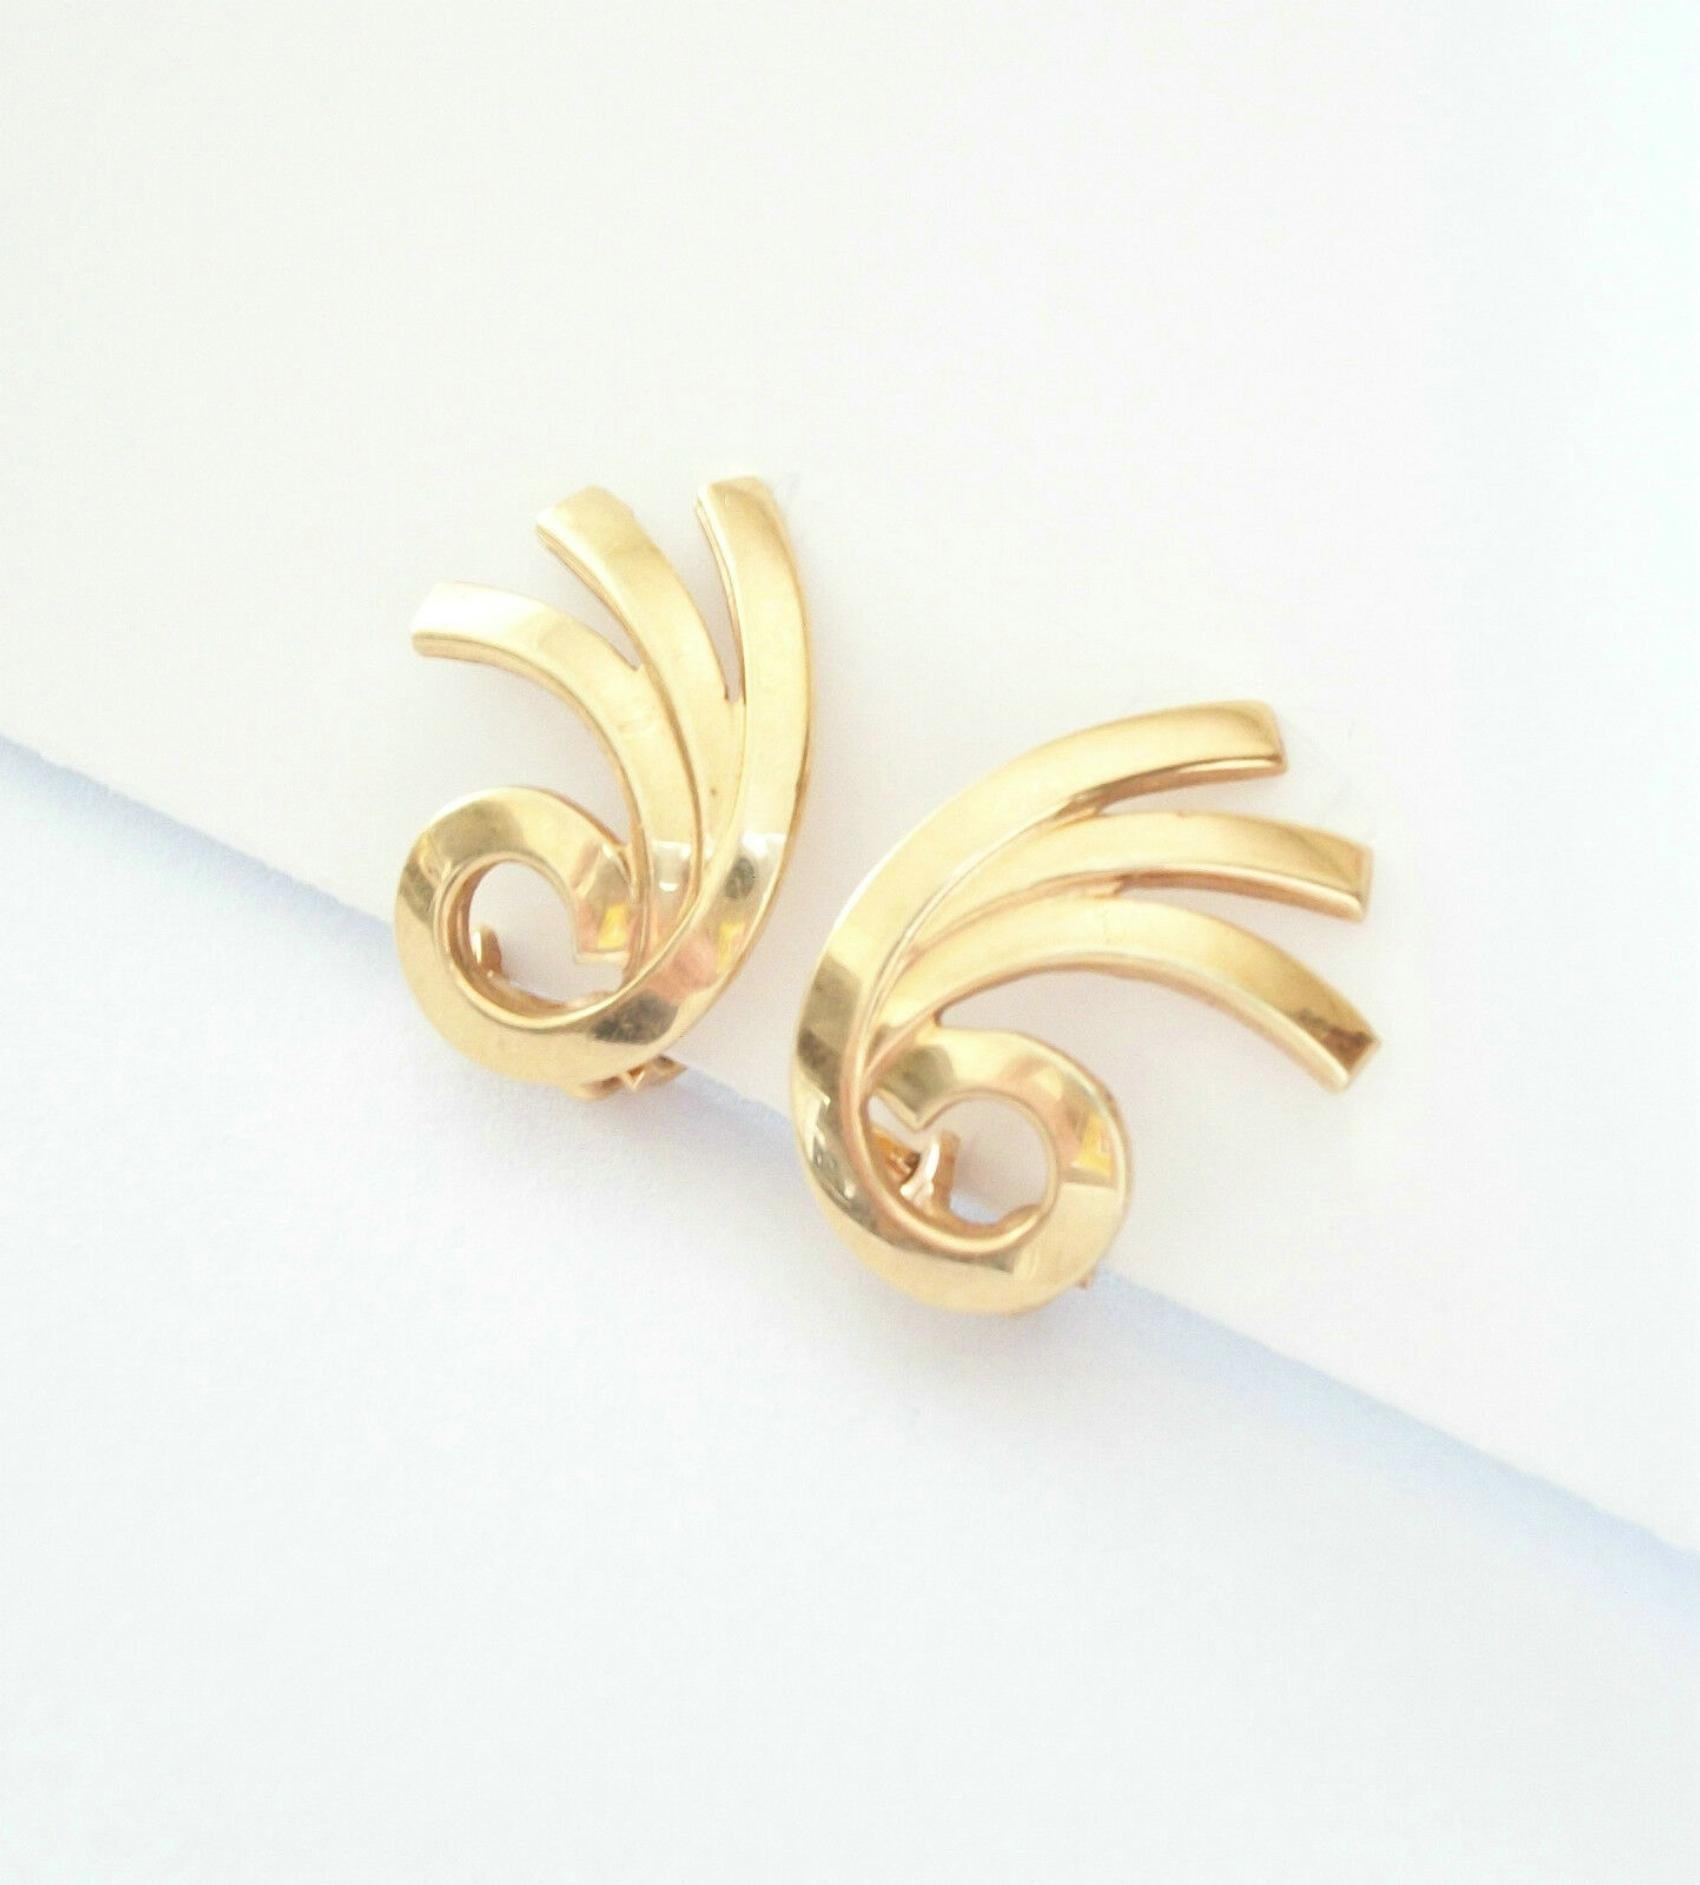 Retro BIRKS - Vintage 14K Yellow Gold Nautilus Earrings - Canada - Mid 20th Century For Sale